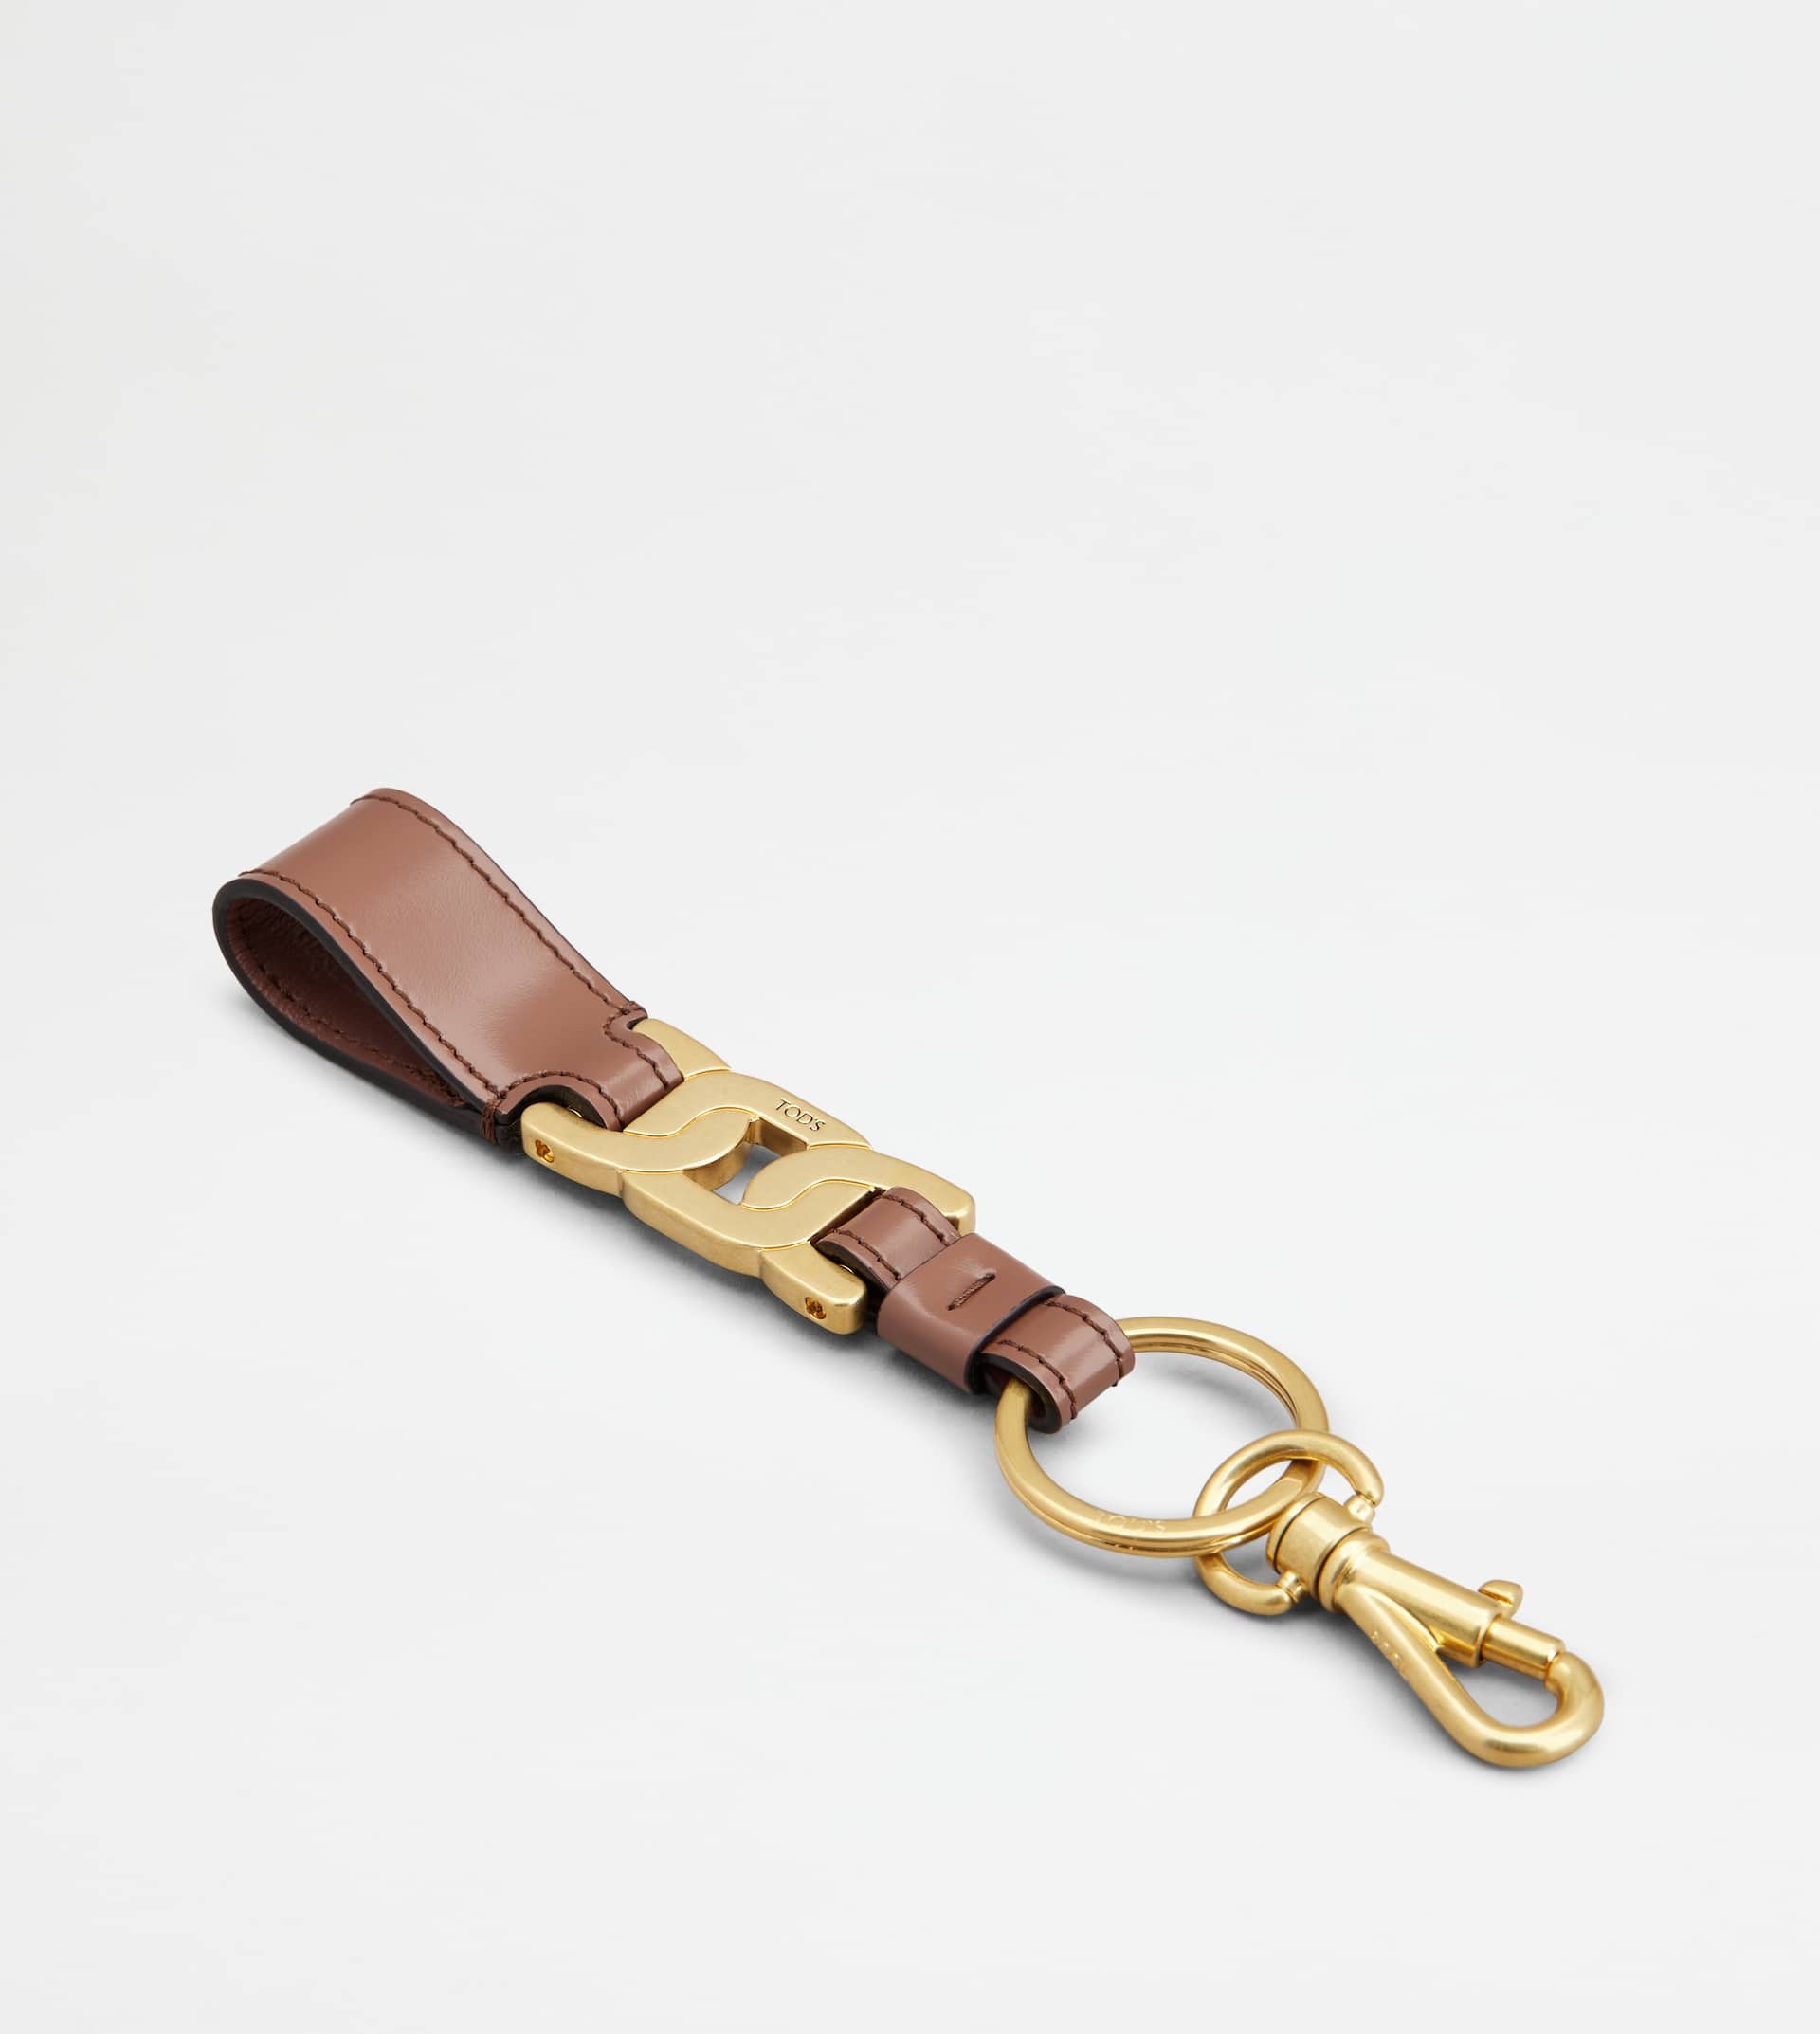 KATE KEY HOLDER IN LEATHER - BROWN - 2